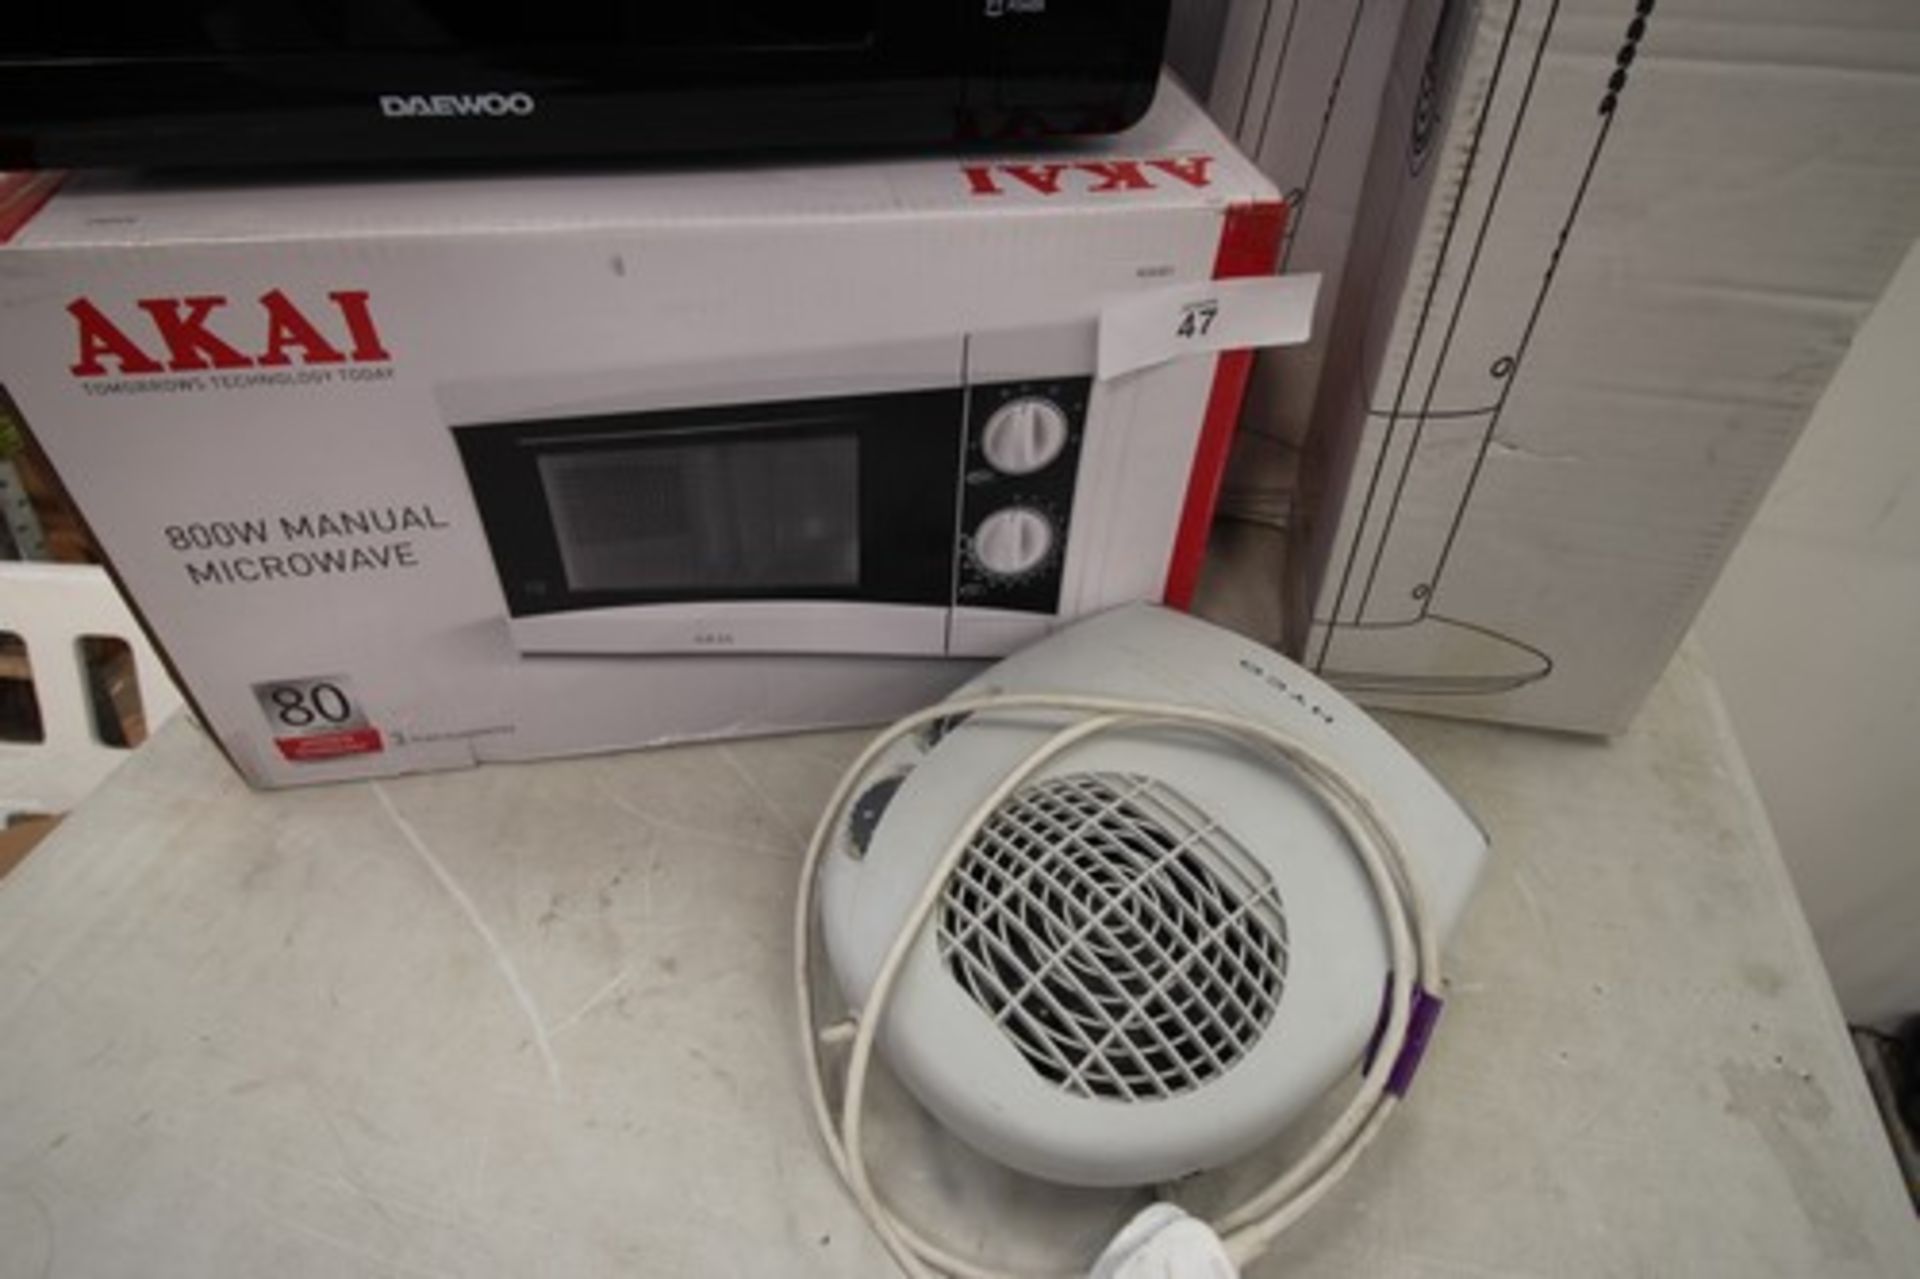 5 x electrical items, including Daewoo and Akai microwaves 38" tower fans, etc. - mixed (ES2) - Image 3 of 3